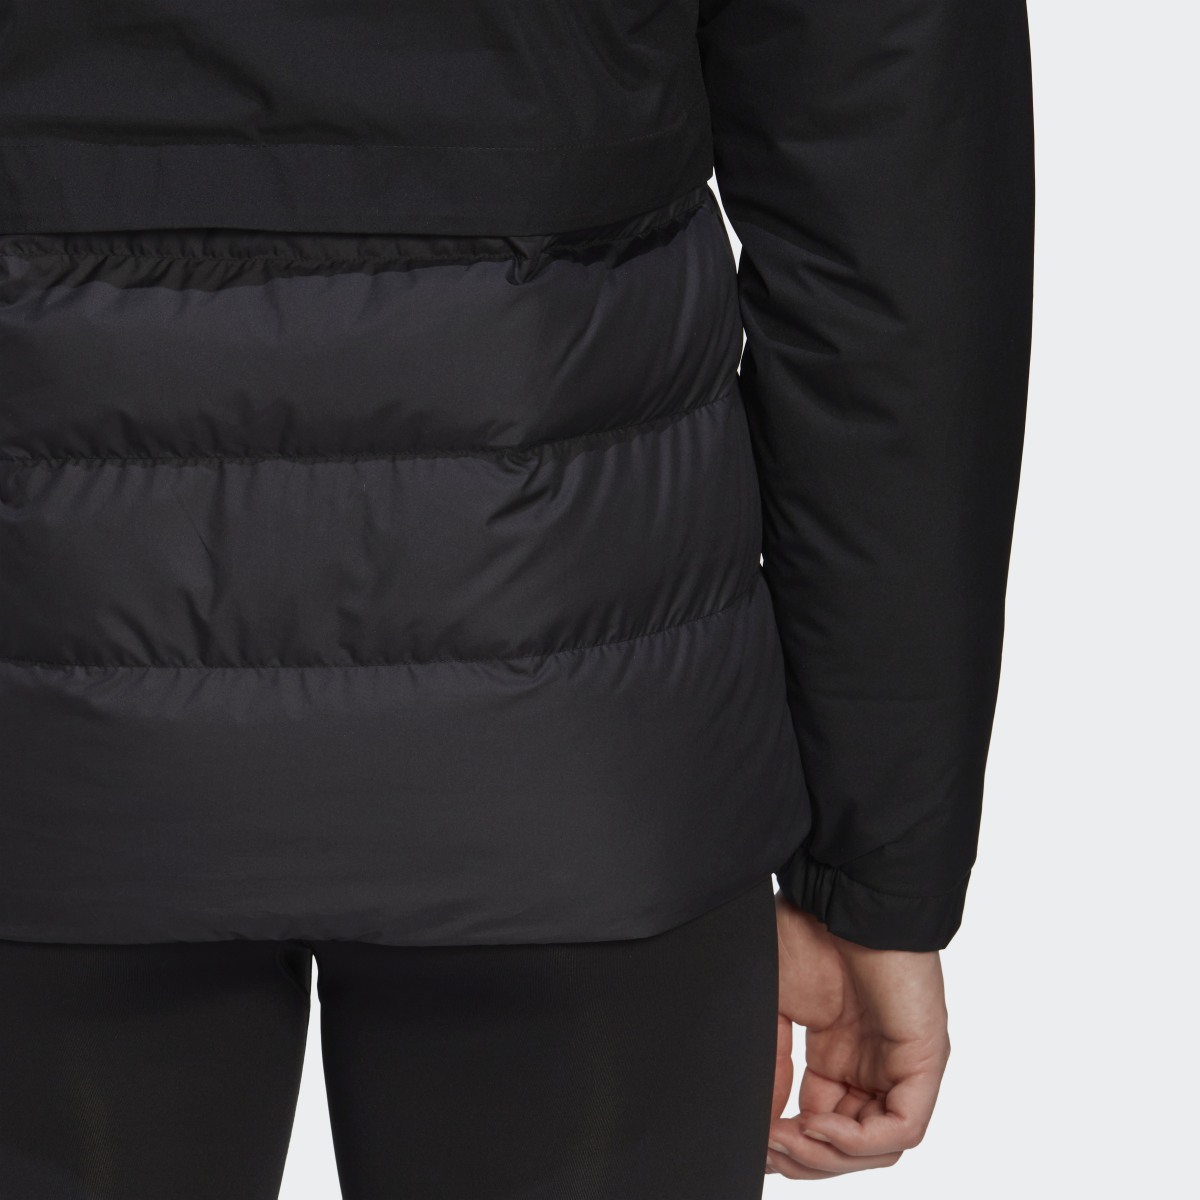 Adidas Traveer COLD.RDY Jacket. 10